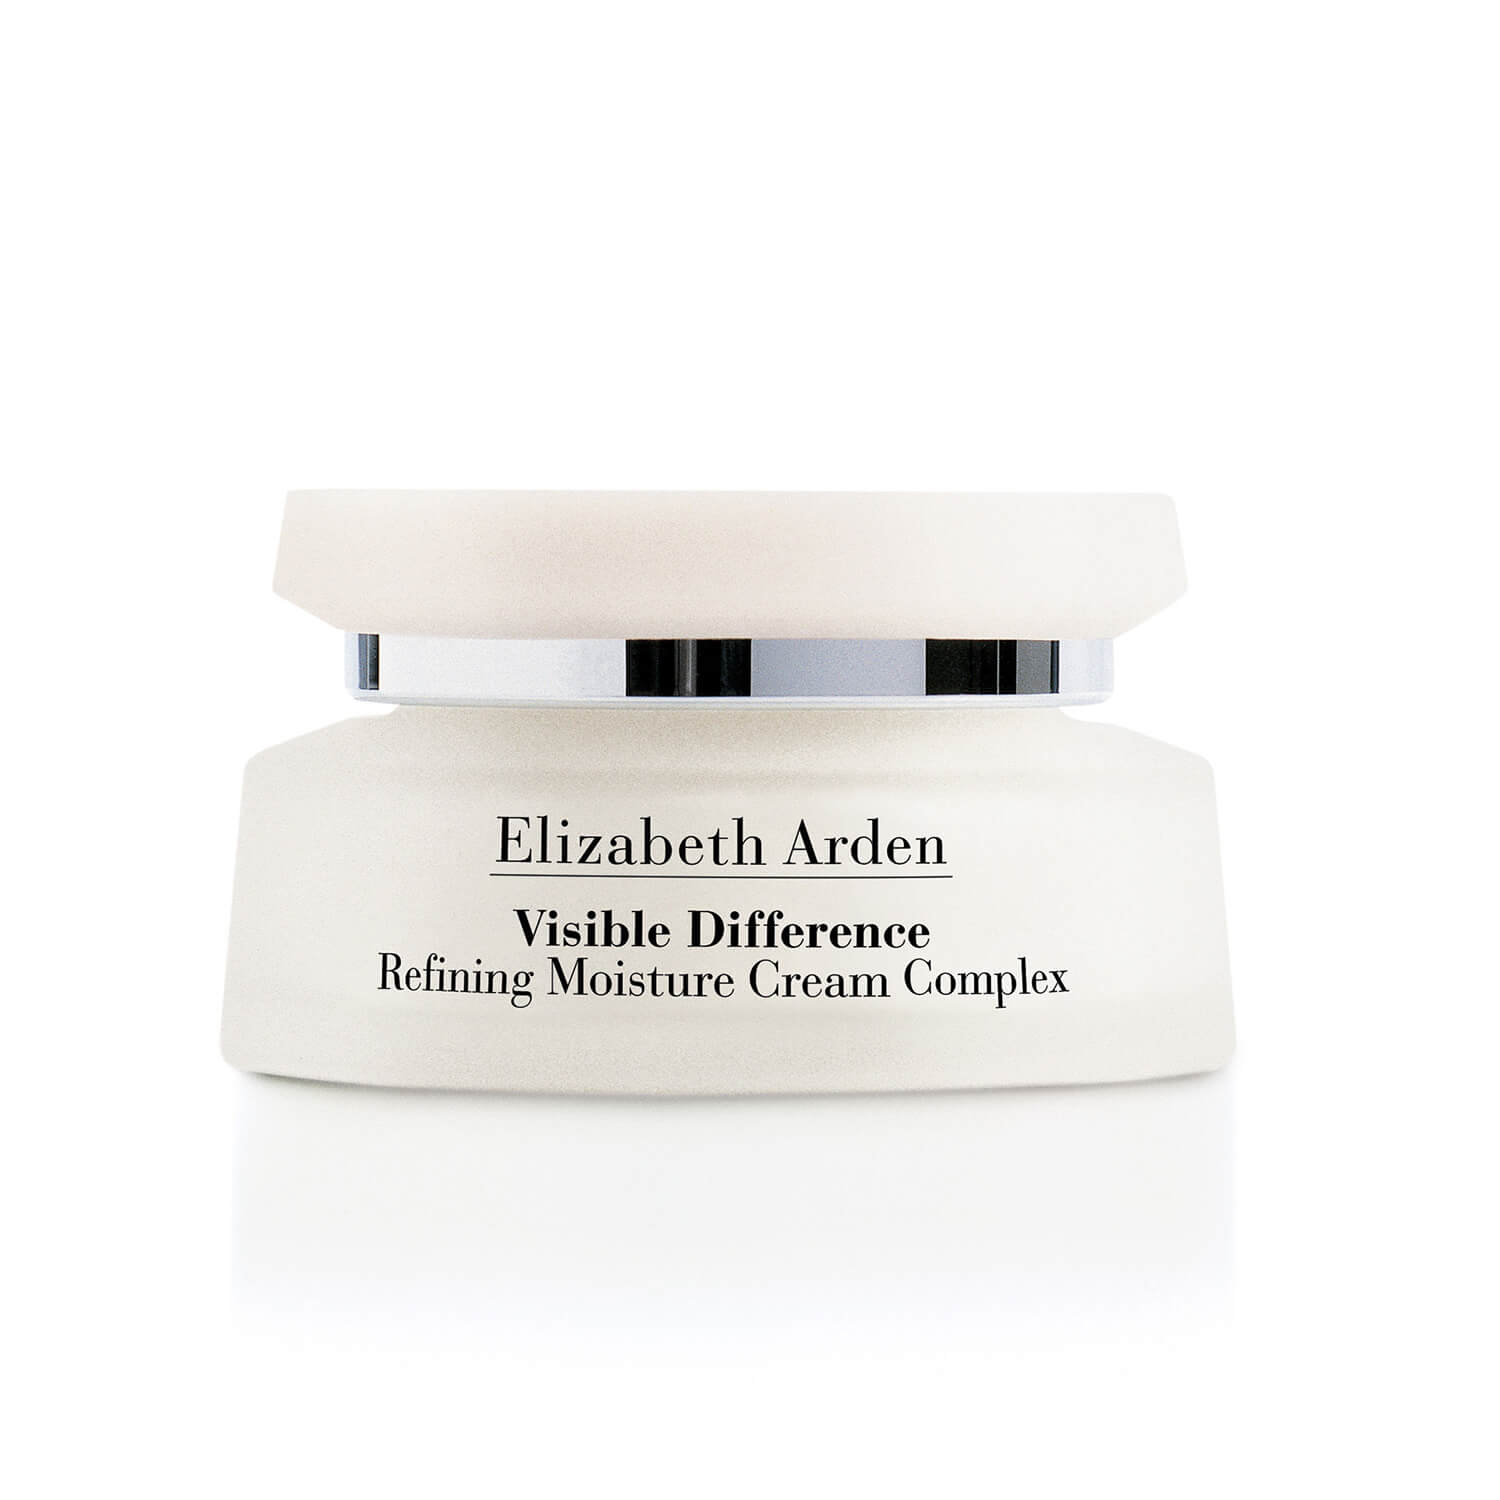 Visible Difference Refining Moisture Cream Complex - 75ml